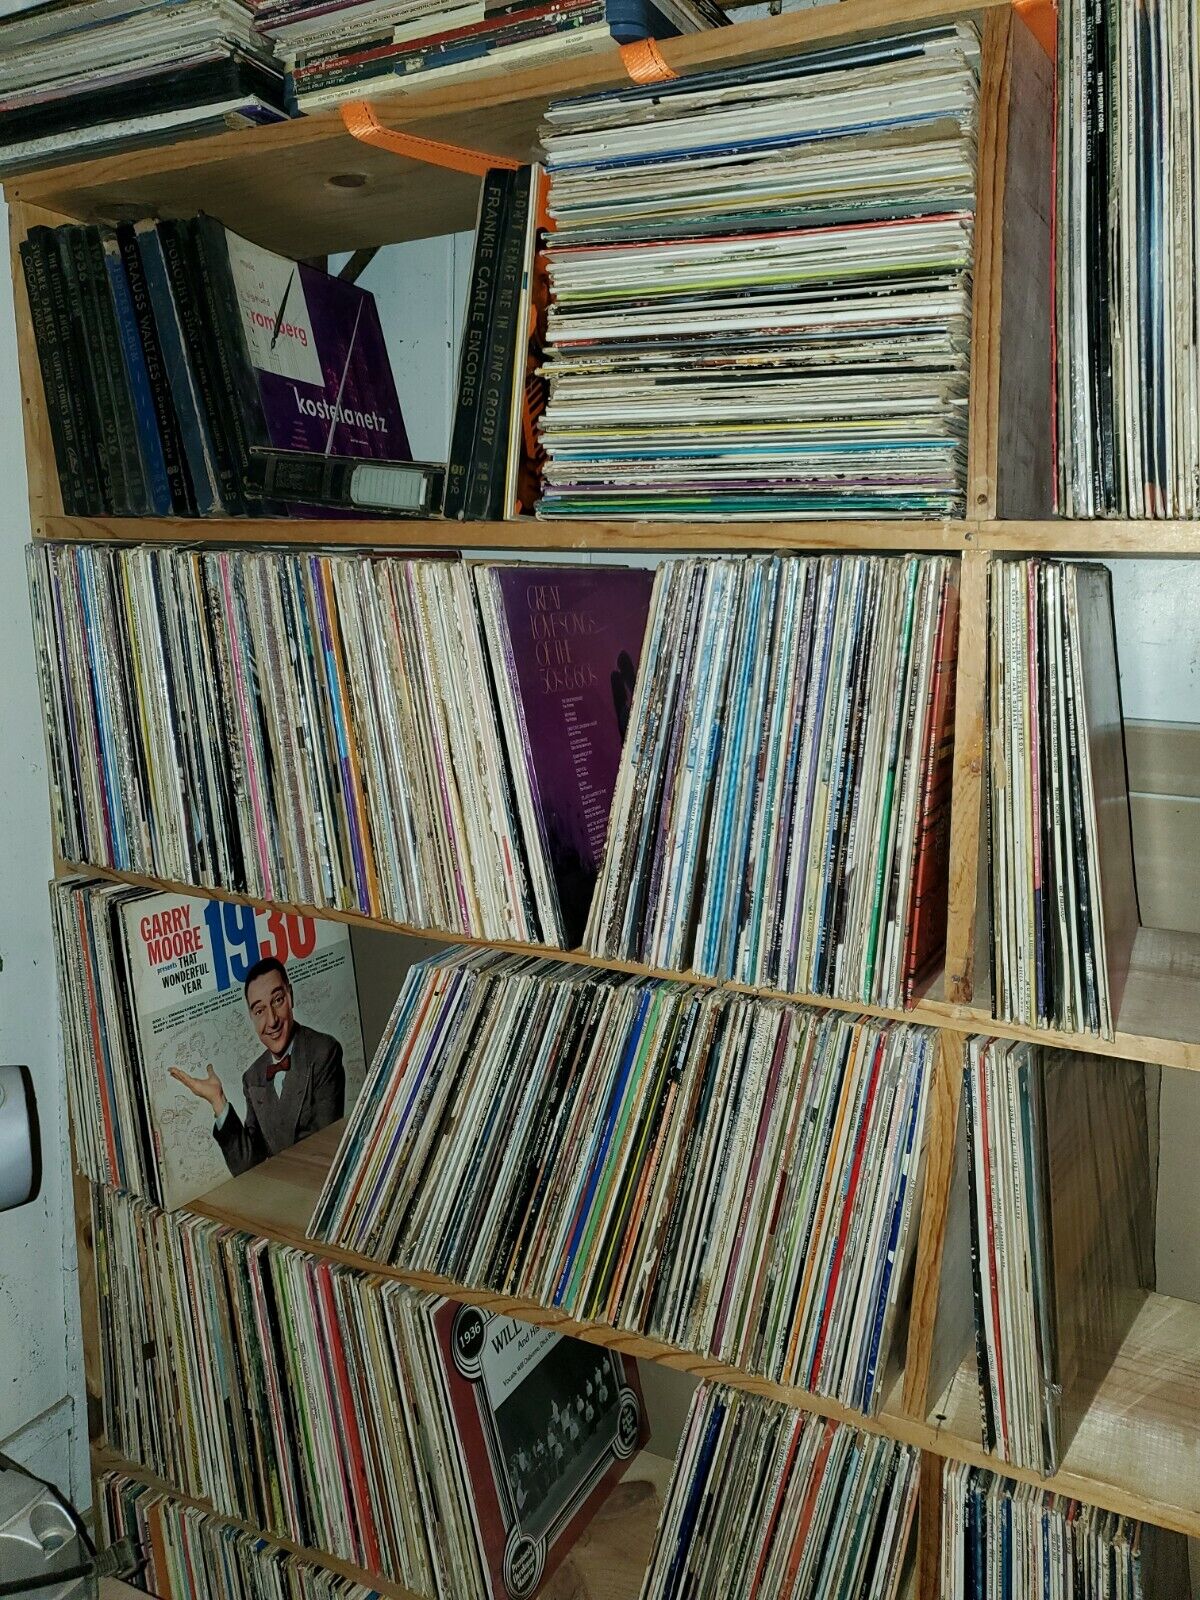 Lot Of 5 Random Records Vintage Collection Clearance 33 rpm Lp Albums